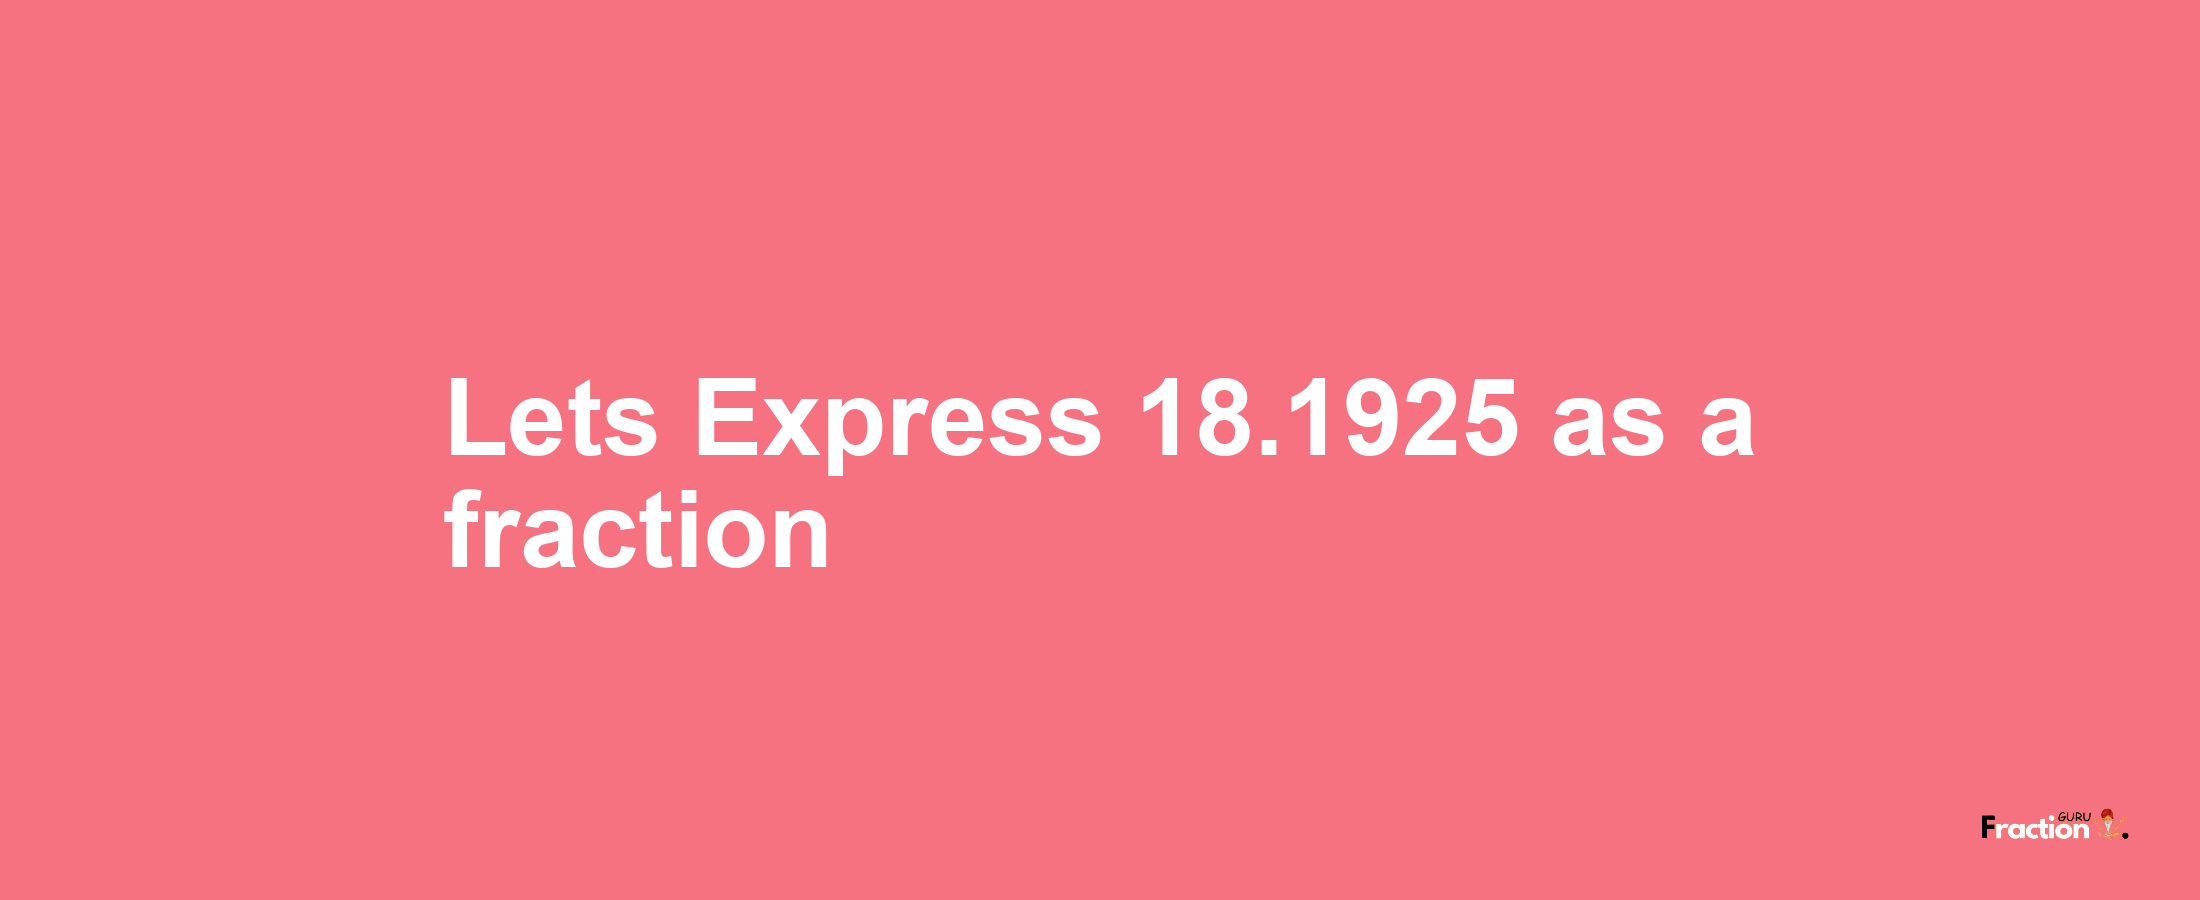 Lets Express 18.1925 as afraction